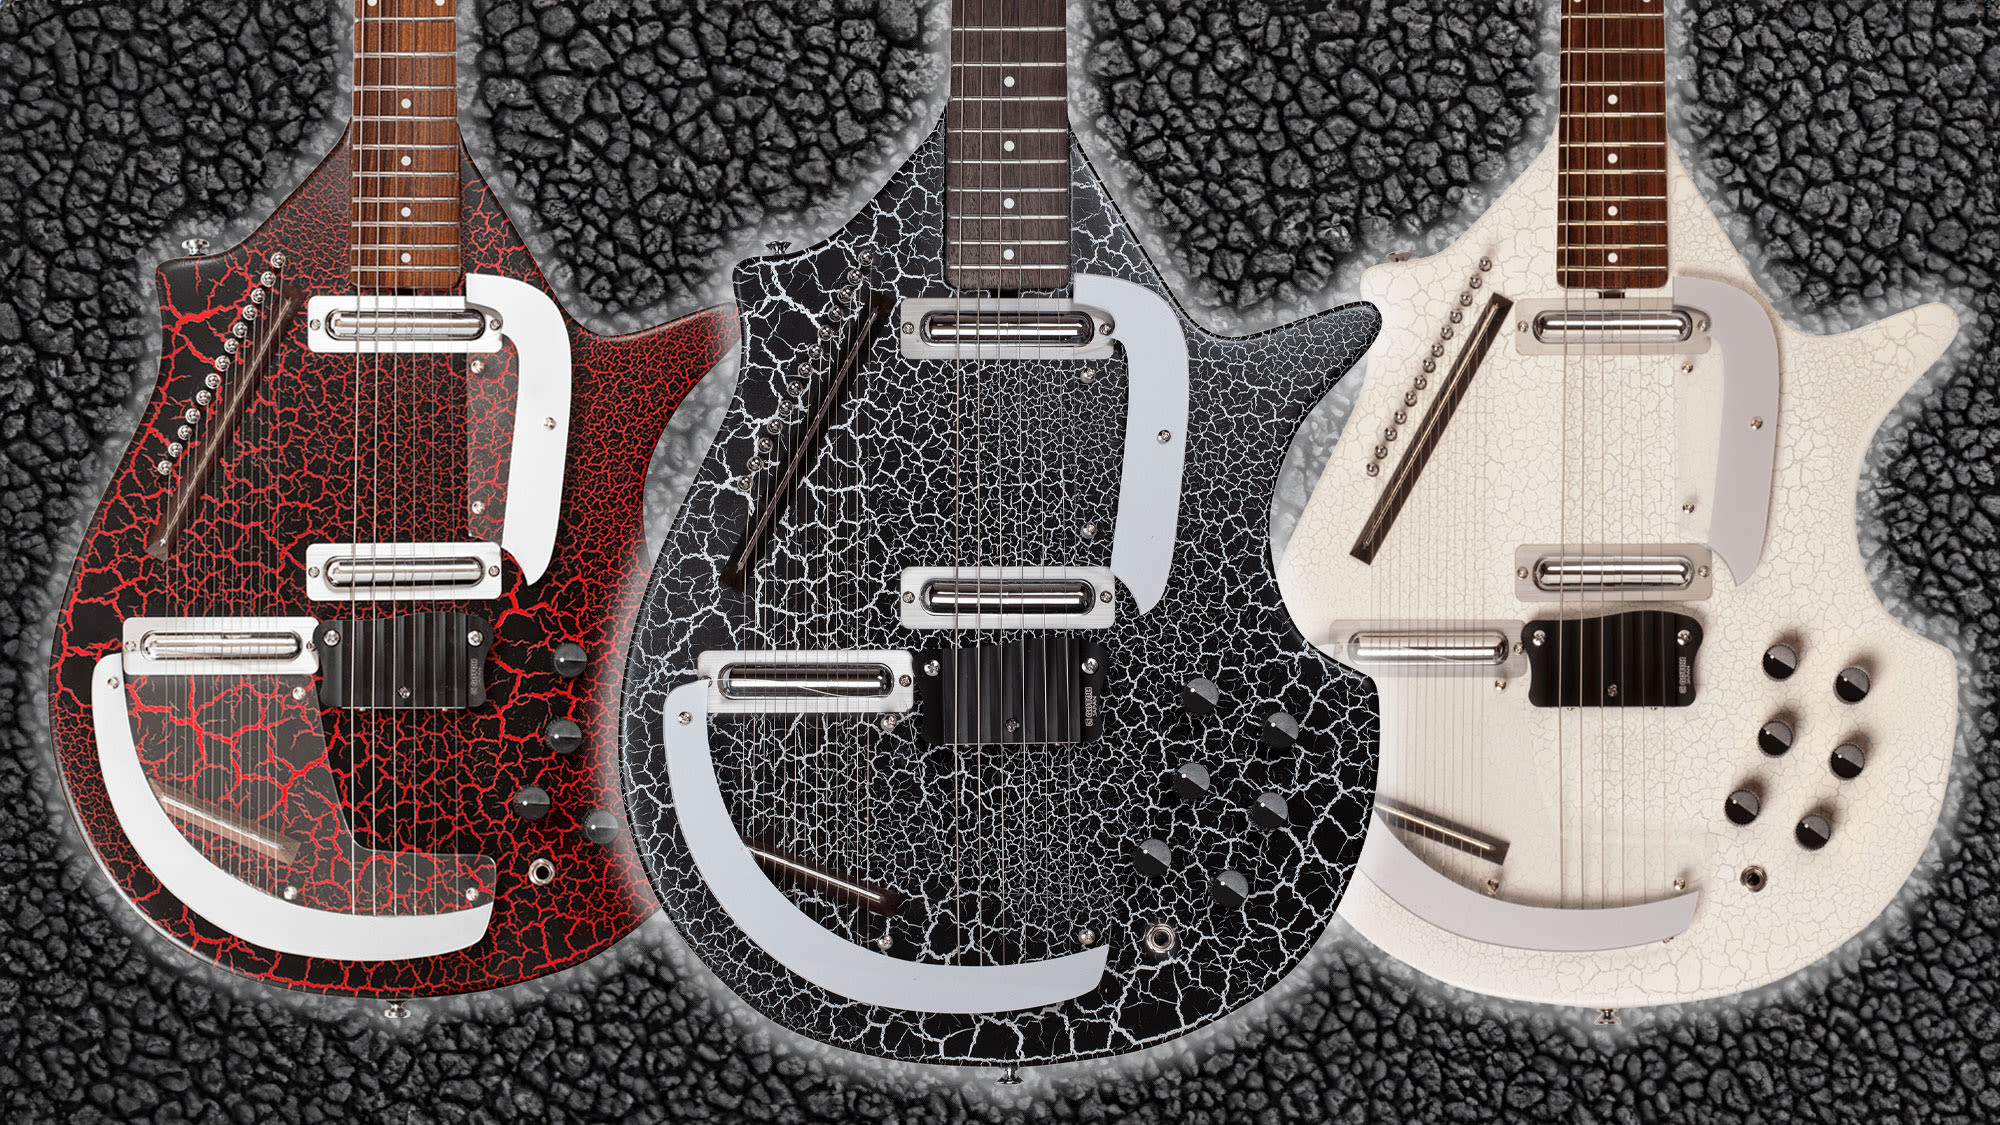 Danelectro has brought back its Big Sitar – with some modern upgrades